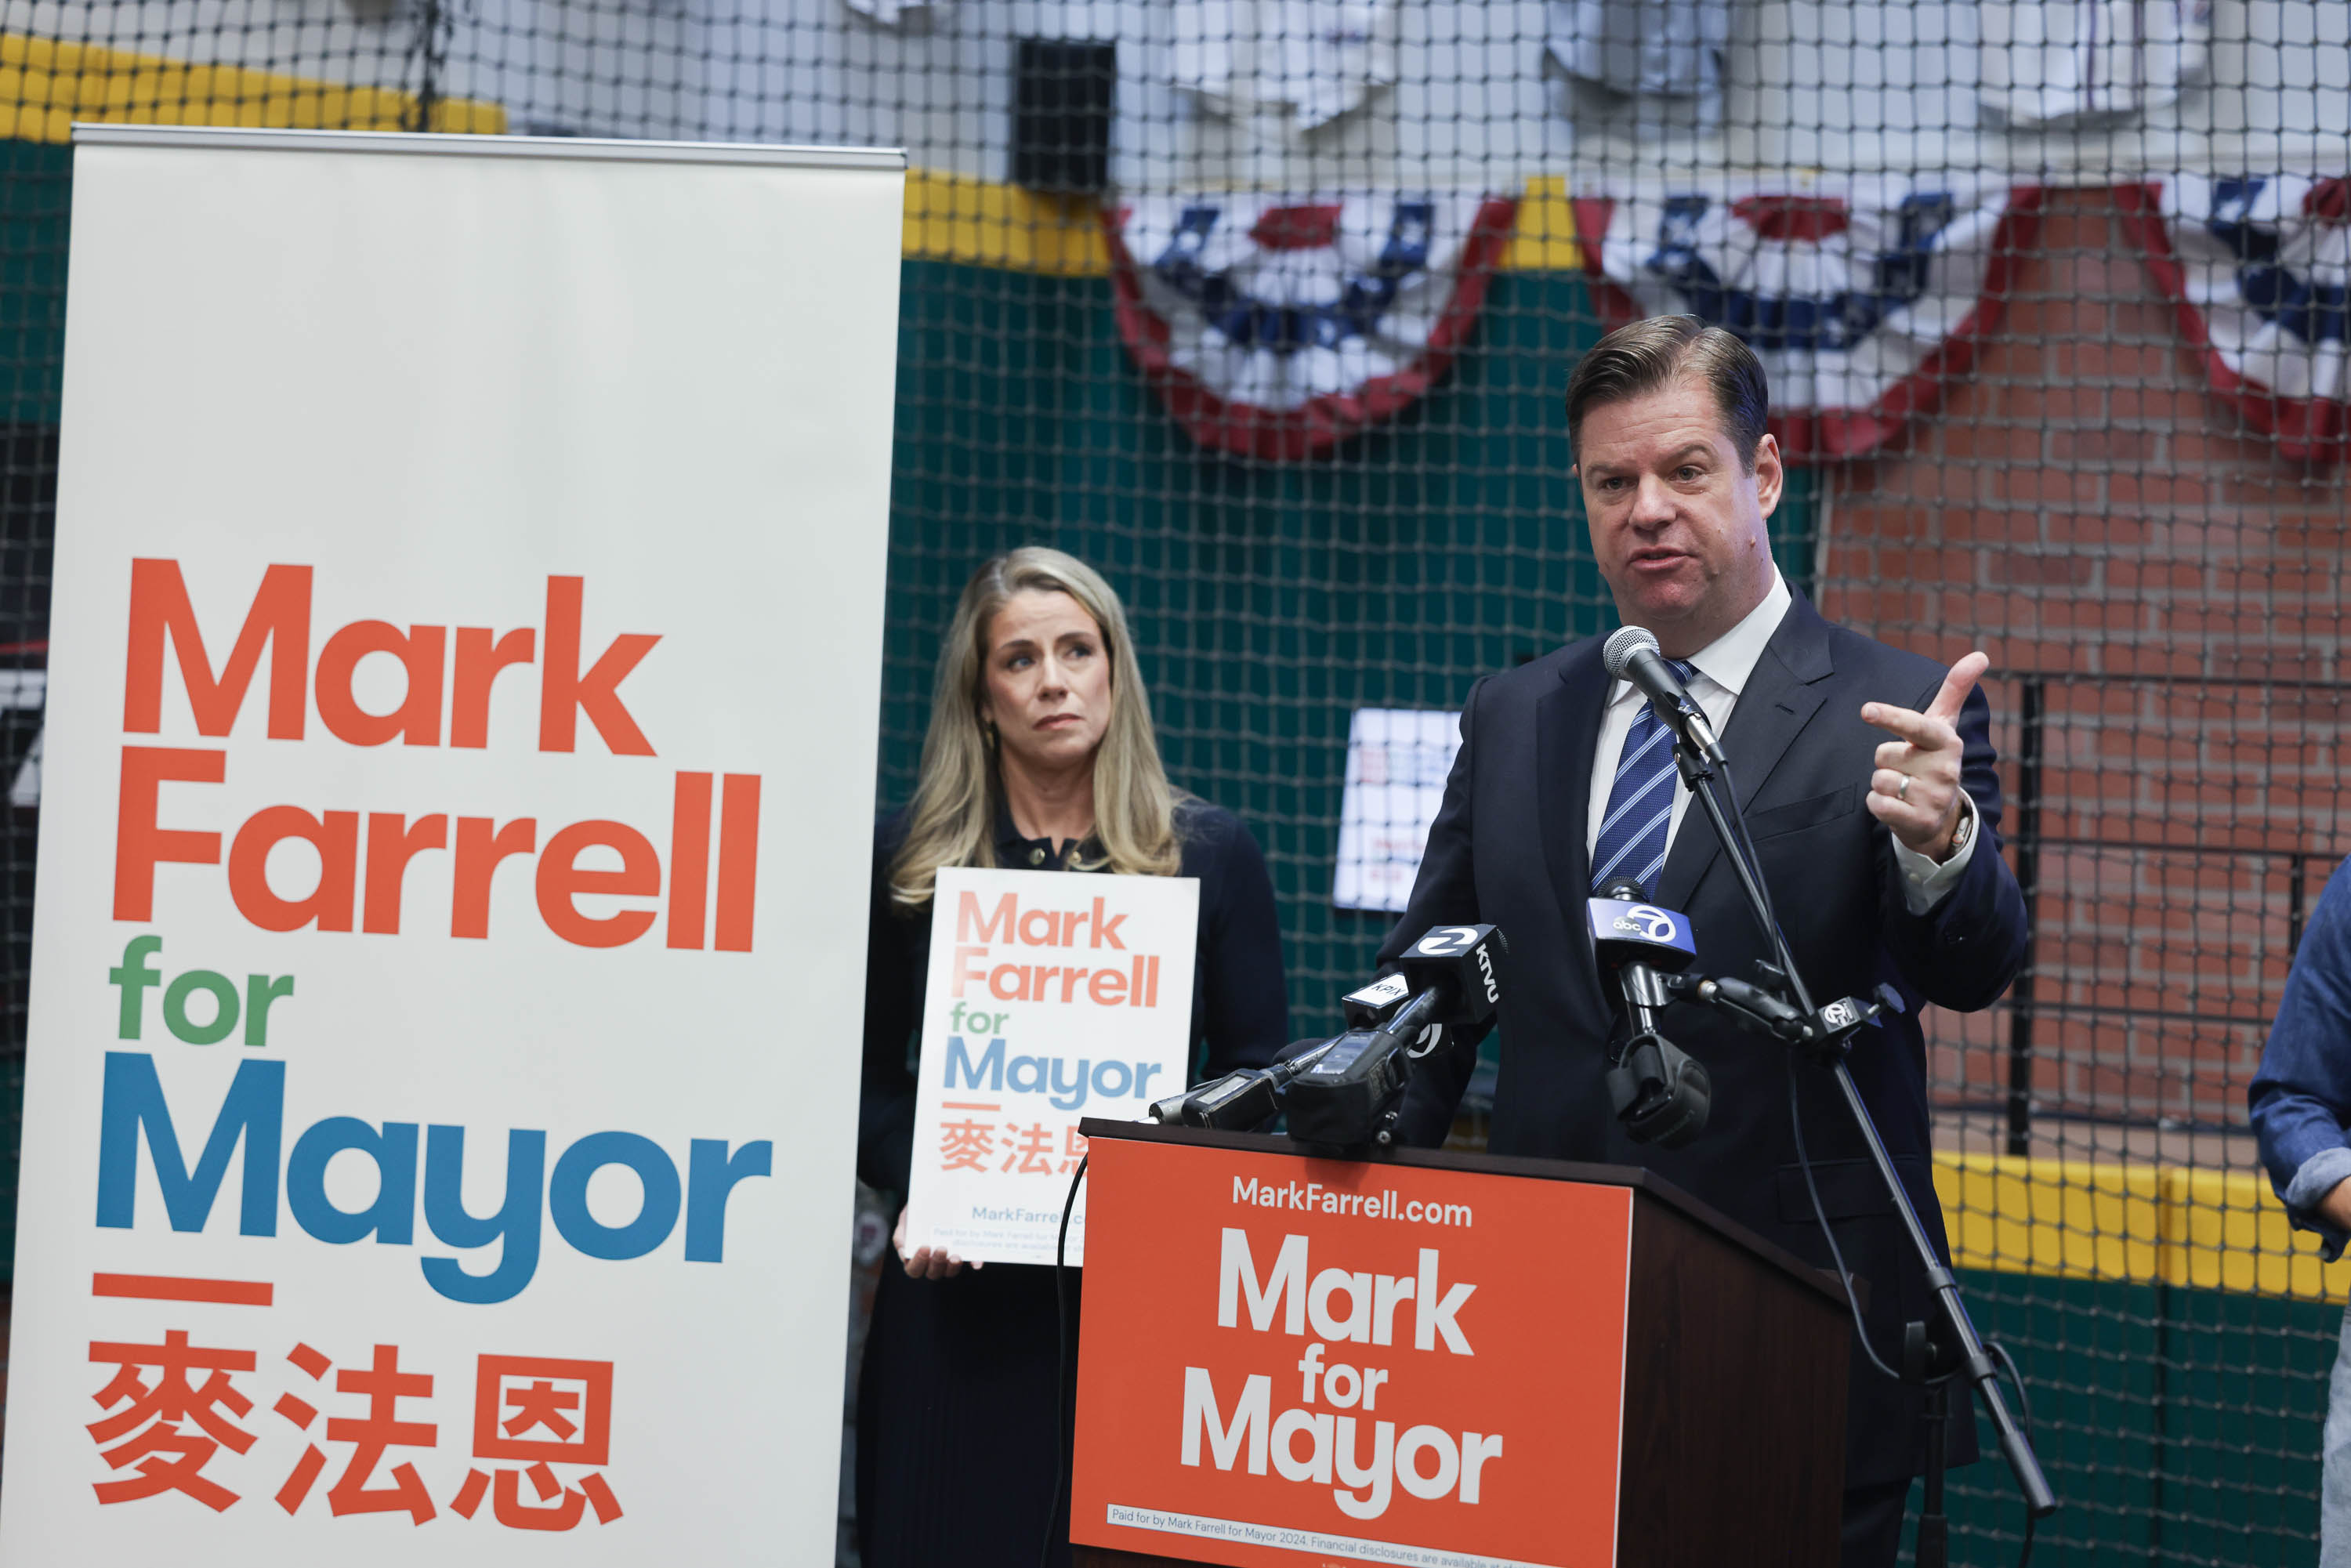 A man speaks at a podium with &quot;Mark Farrell for Mayor&quot; signs, a woman stands behind him, and microphones are in front.